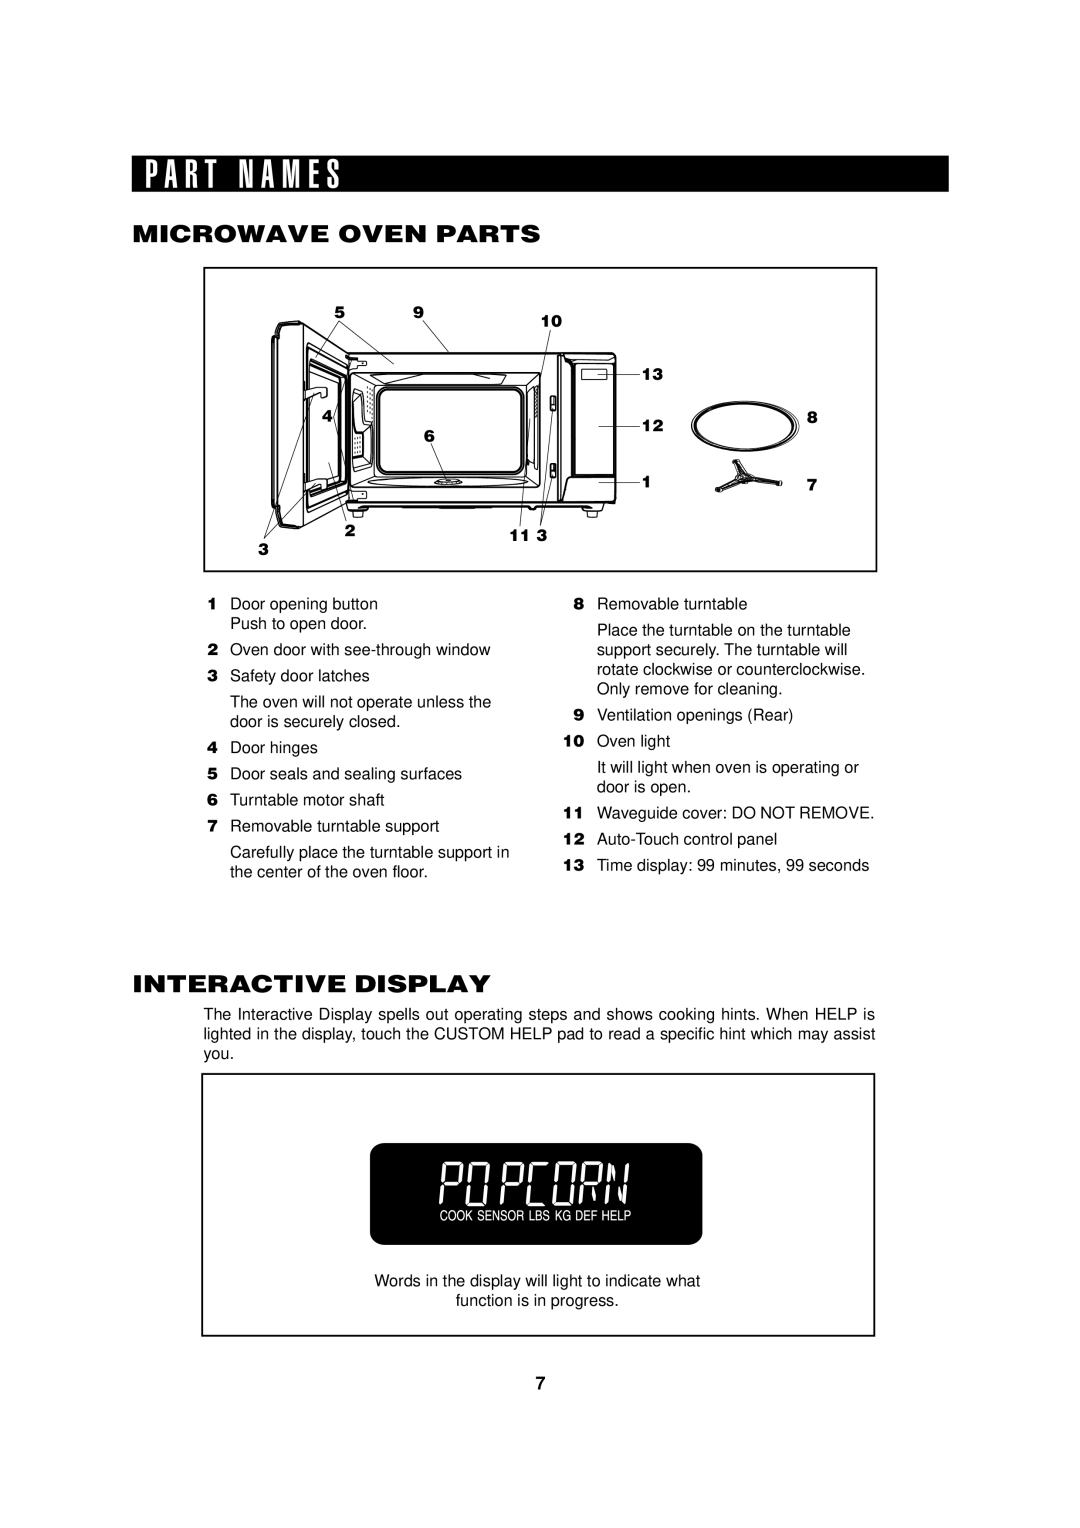 Food Quality Sensor R-320H operation manual P A R T N A M E S, Microwave Oven Parts, Interactive Display 